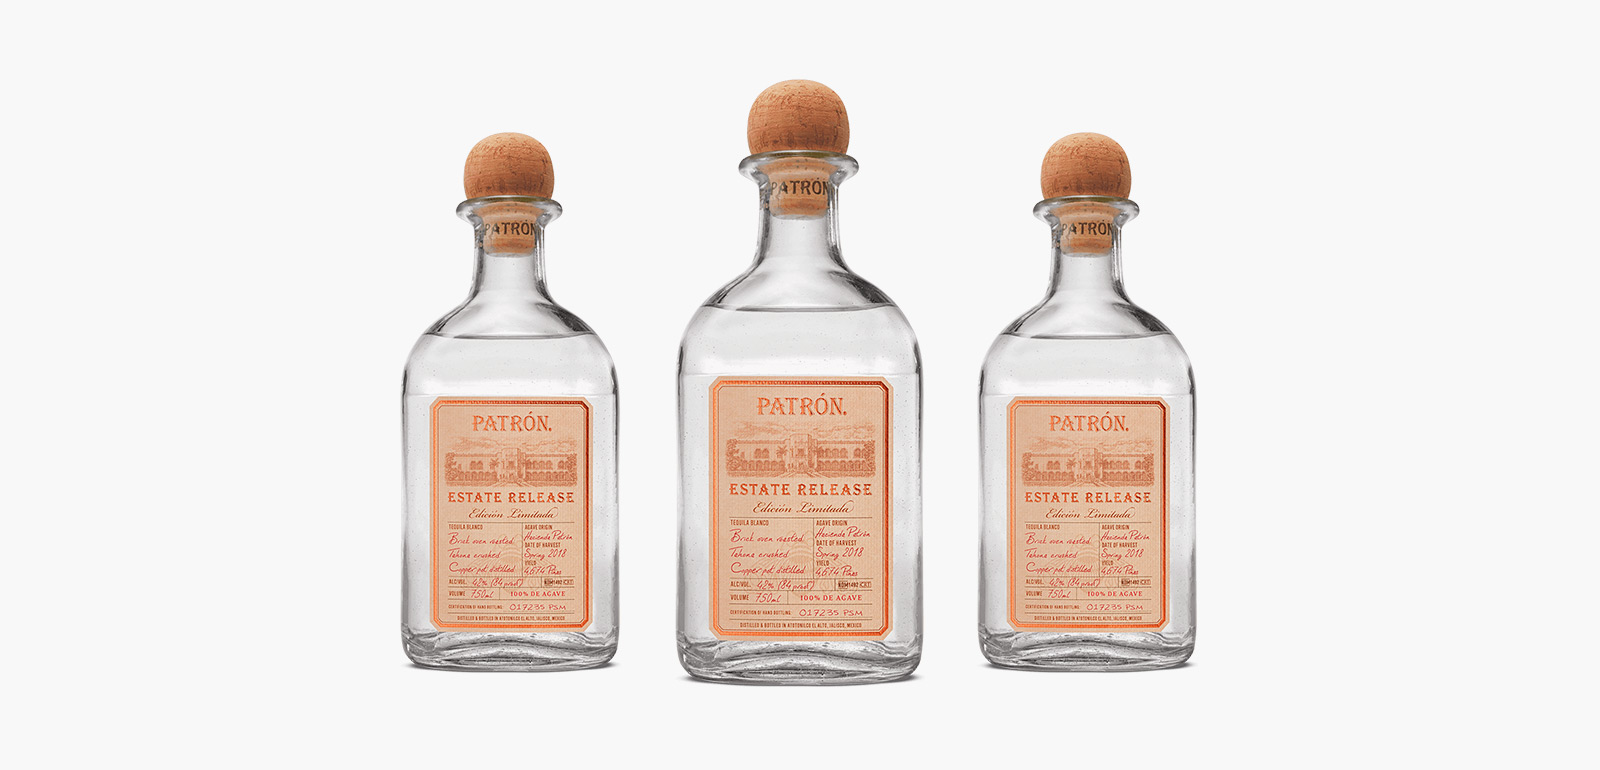 Patrón Estate Release Limited Edition Tequila